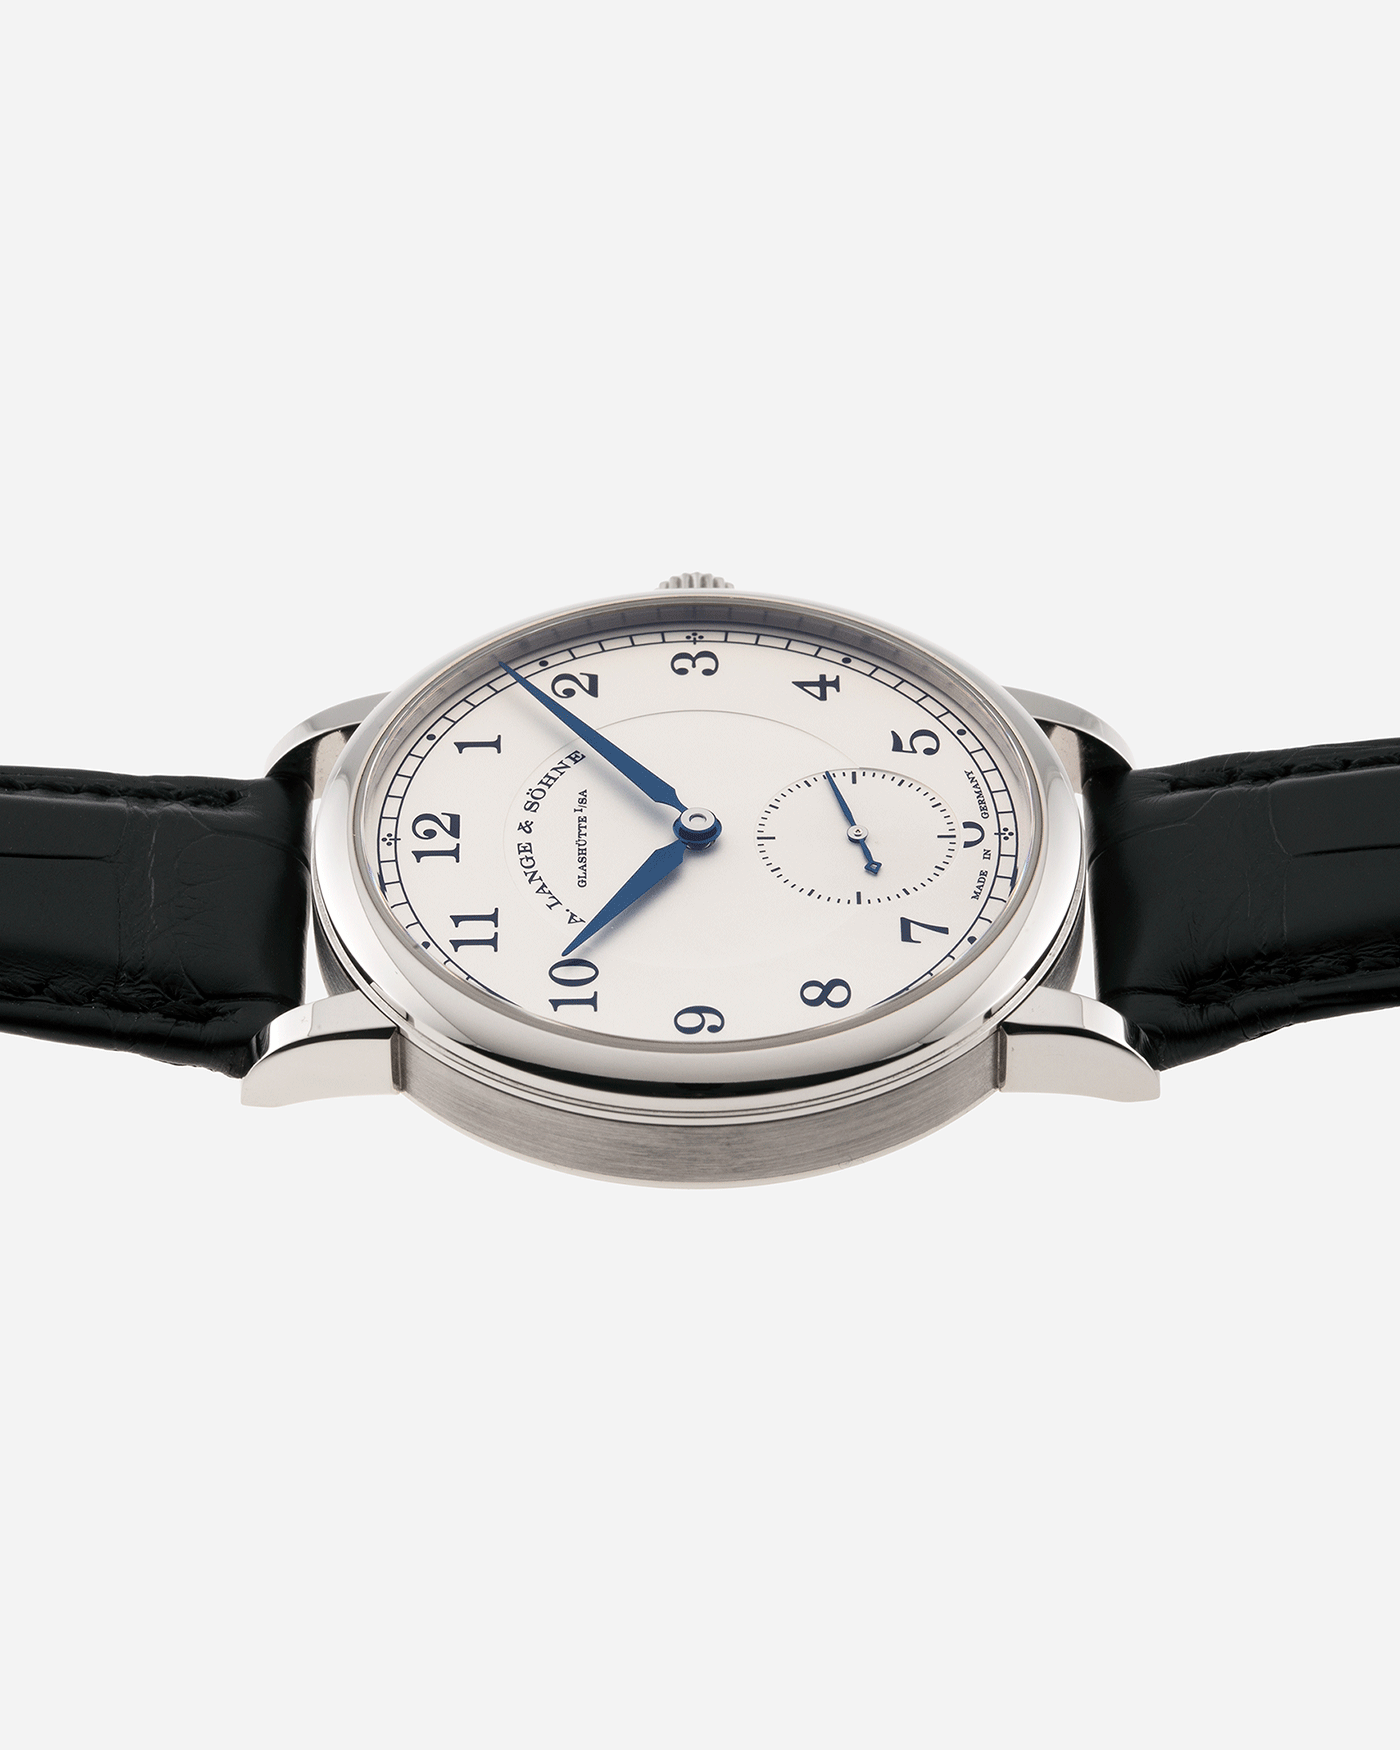 Brand: A. Lange & Sohne Year: 2010’s Model: 1815 Annual Calendar Ref Number: 235.026 Material: 18k White Gold Movement: Manual Winding In-House Cal. L051.1 Case Diameter: 38mm Bracelet/Strap: A. Lange & Sohne Black Alligator Strap with signed 18k White Gold Tang Buckle